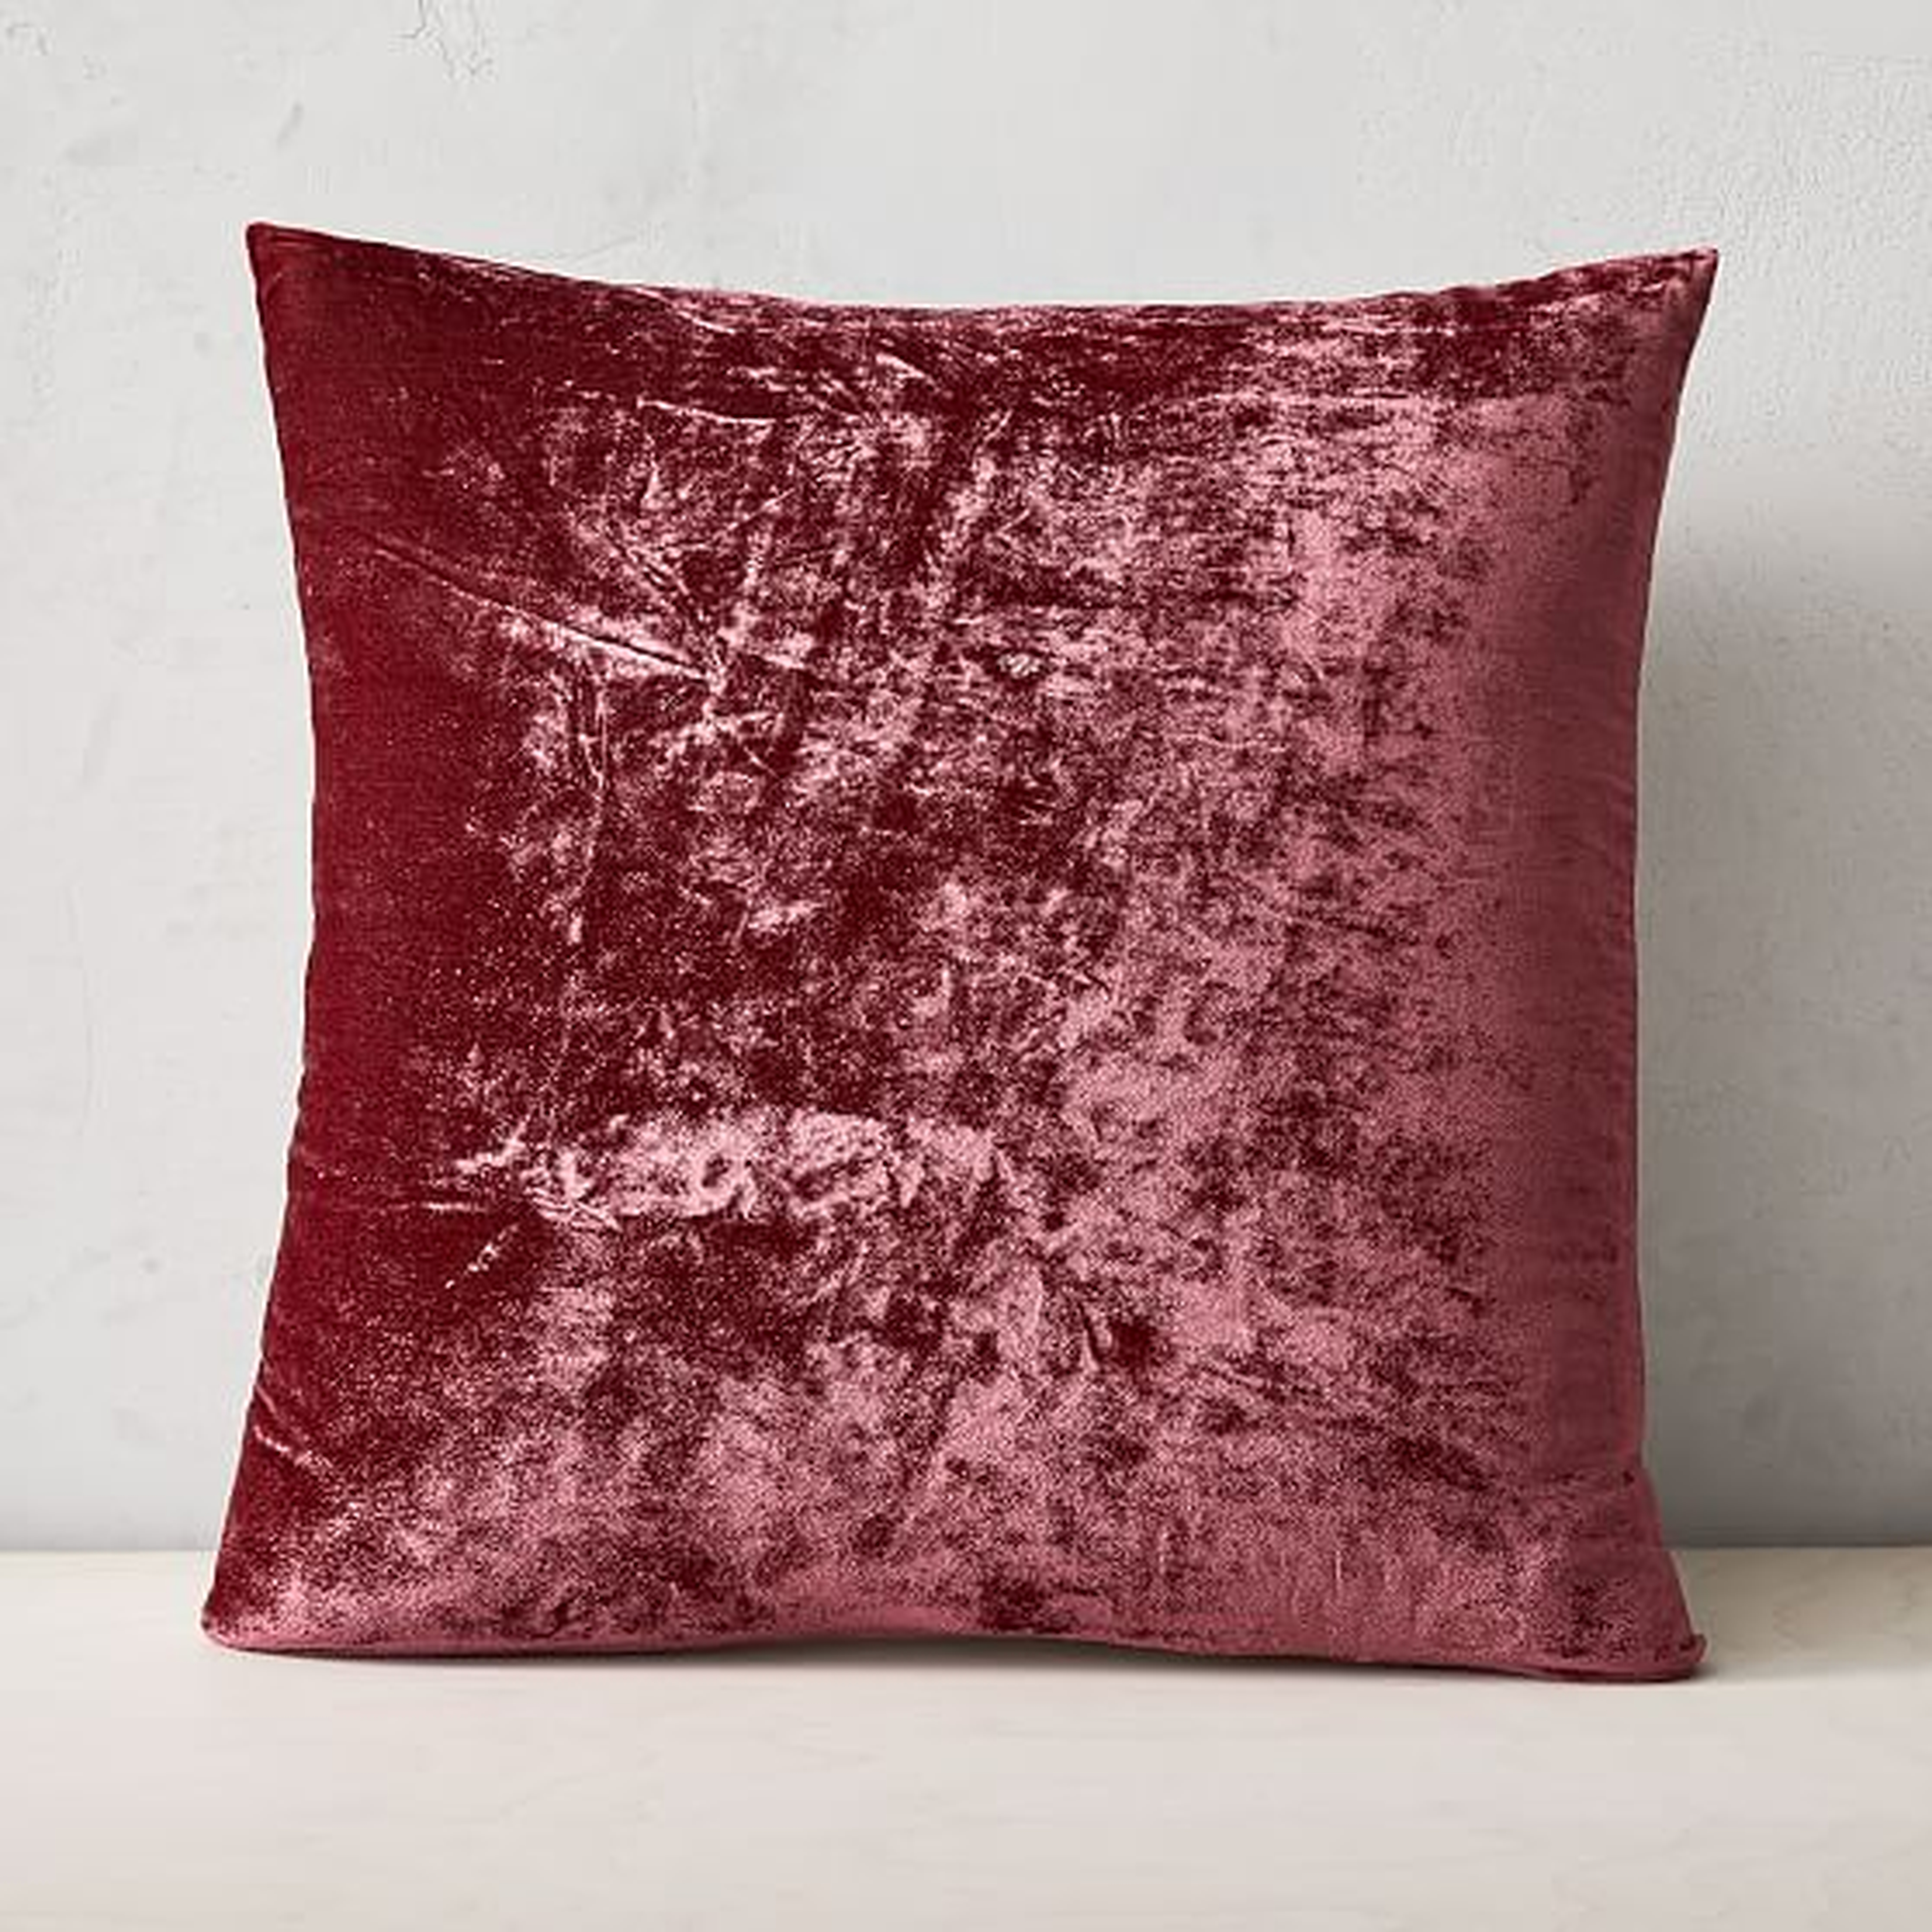 Lush Velvet Pillow Cover, Set of 2, Washed Ruby, 20"x20" - West Elm